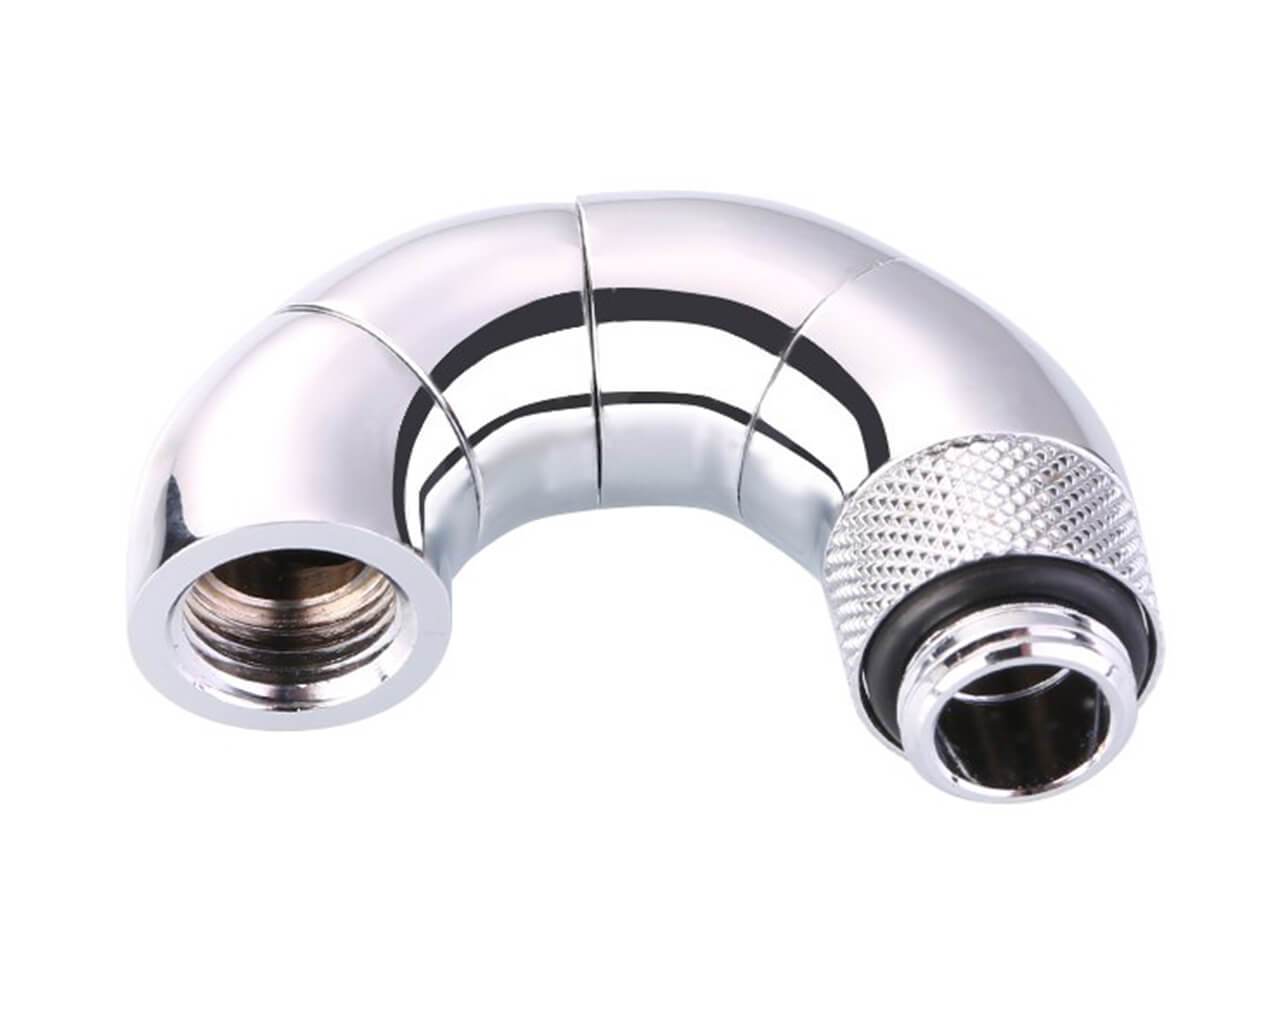 Bykski G1/4 Male to Female 180 Degree Triple Rotary Elbow Fitting (B-RD180-SK) - PrimoChill - KEEPING IT COOL Silver